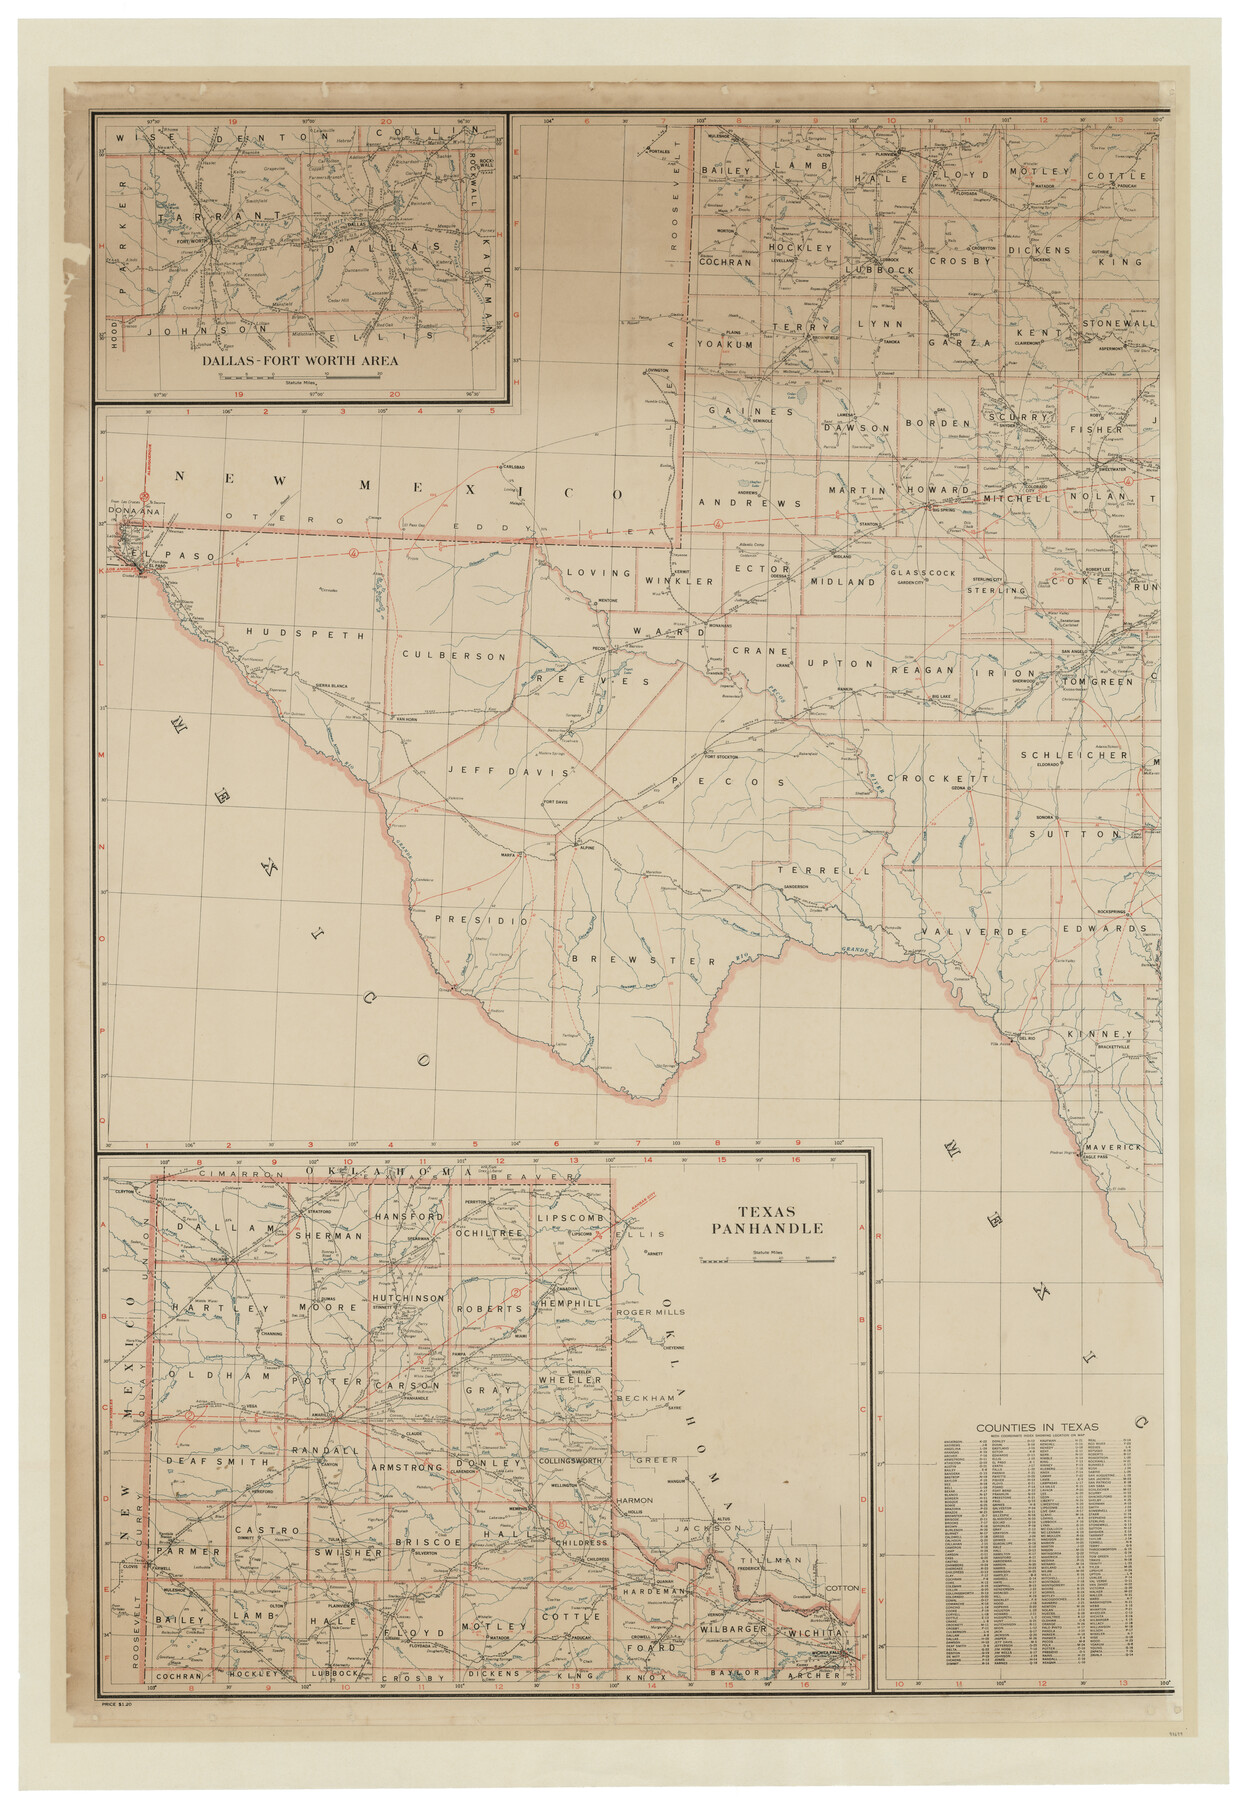 93699, Post Route Map of Texas (Inset 1: Dallas-Fort Worth Area; Inset 2: Texas Panhandle), General Map Collection